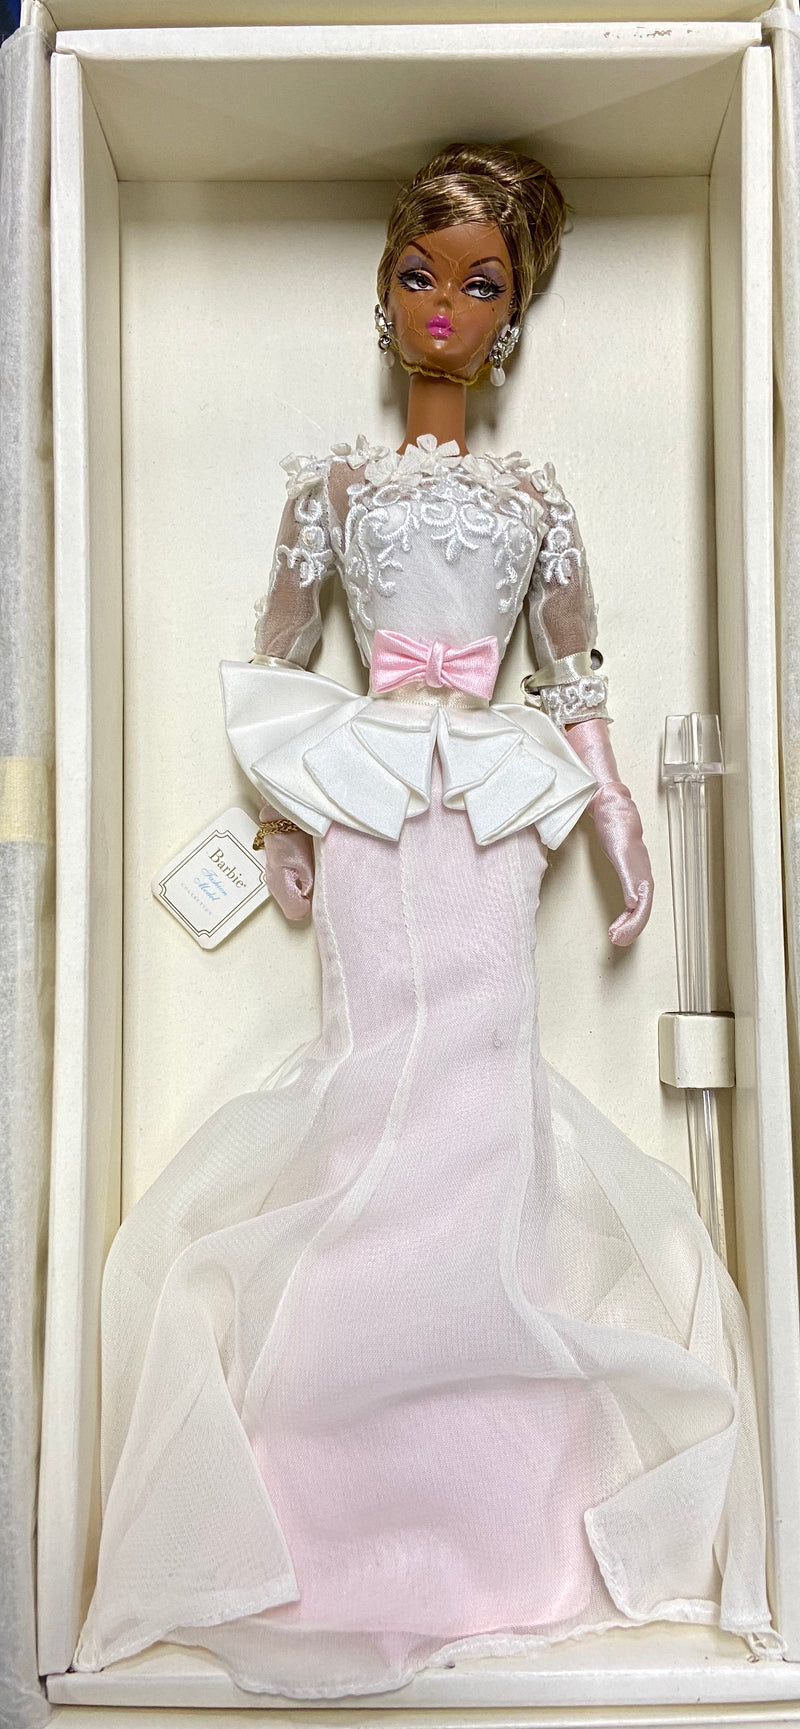 BARBIE FASHION MODEL GOLD LABEL COLLECTION 2012 EVENING GOWN GENUINE SILKSTONE BODY COLLECTABLE DOLL